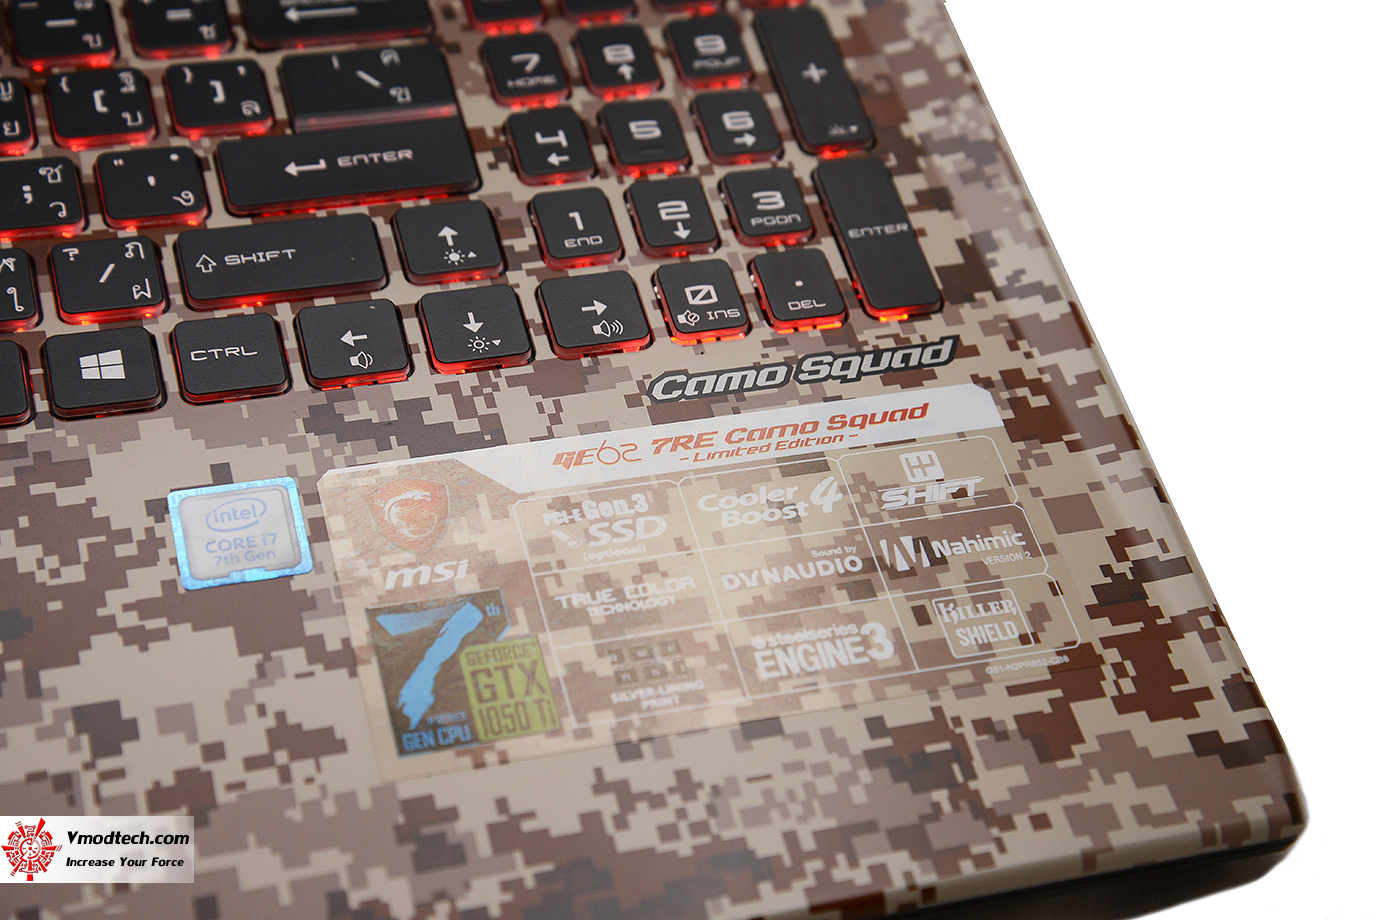 dsc 1152 MSI GE62 7RE Camo Squad Limited Edition Review